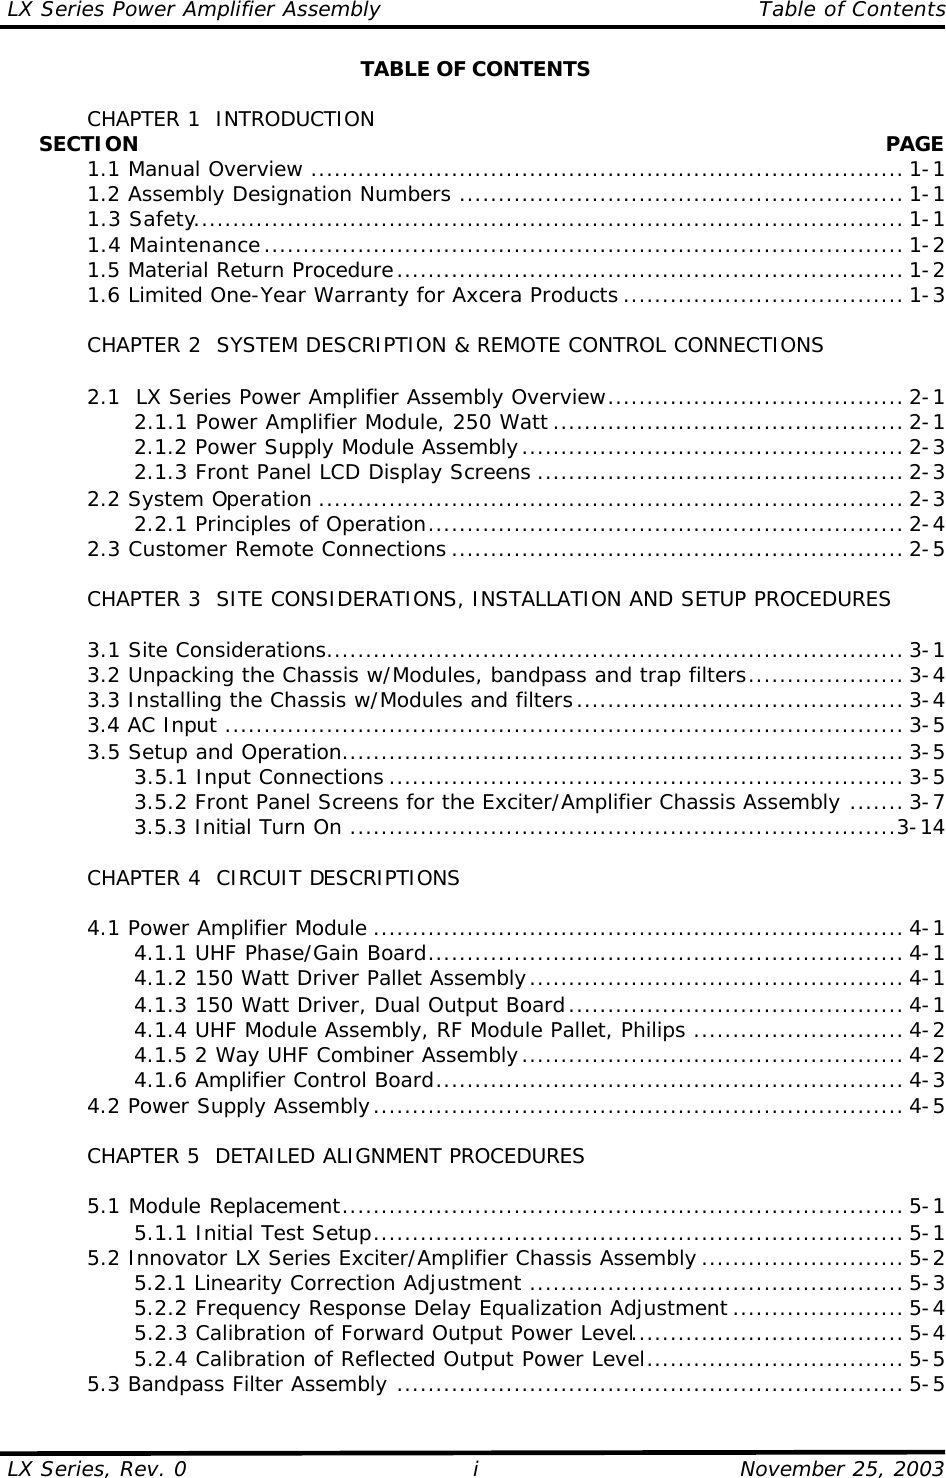 LX Series Power Amplifier Assembly    Table of Contents  LX Series, Rev. 0    November 25, 2003 i TABLE OF CONTENTS   CHAPTER 1  INTRODUCTION      SECTION    PAGE  1.1 Manual Overview ............................................................................ 1-1  1.2 Assembly Designation Numbers ......................................................... 1-1  1.3 Safety........................................................................................... 1-1  1.4 Maintenance.................................................................................. 1-2  1.5 Material Return Procedure................................................................. 1-2  1.6 Limited One-Year Warranty for Axcera Products .................................... 1-3   CHAPTER 2  SYSTEM DESCRIPTION &amp; REMOTE CONTROL CONNECTIONS   2.1  LX Series Power Amplifier Assembly Overview...................................... 2-1     2.1.1 Power Amplifier Module, 250 Watt ............................................. 2-1     2.1.2 Power Supply Module Assembly................................................. 2-3     2.1.3 Front Panel LCD Display Screens ............................................... 2-3  2.2 System Operation ........................................................................... 2-3     2.2.1 Principles of Operation............................................................. 2-4  2.3 Customer Remote Connections .......................................................... 2-5       CHAPTER 3  SITE CONSIDERATIONS, INSTALLATION AND SETUP PROCEDURES     3.1 Site Considerations.......................................................................... 3-1  3.2 Unpacking the Chassis w/Modules, bandpass and trap filters.................... 3-4  3.3 Installing the Chassis w/Modules and filters.......................................... 3-4  3.4 AC Input ....................................................................................... 3-5  3.5 Setup and Operation........................................................................ 3-5     3.5.1 Input Connections .................................................................. 3-5     3.5.2 Front Panel Screens for the Exciter/Amplifier Chassis Assembly ....... 3-7     3.5.3 Initial Turn On ......................................................................3-14   CHAPTER 4  CIRCUIT DESCRIPTIONS   4.1 Power Amplifier Module .................................................................... 4-1     4.1.1 UHF Phase/Gain Board............................................................. 4-1     4.1.2 150 Watt Driver Pallet Assembly................................................ 4-1     4.1.3 150 Watt Driver, Dual Output Board........................................... 4-1     4.1.4 UHF Module Assembly, RF Module Pallet, Philips ........................... 4-2     4.1.5 2 Way UHF Combiner Assembly................................................. 4-2     4.1.6 Amplifier Control Board............................................................ 4-3  4.2 Power Supply Assembly.................................................................... 4-5   CHAPTER 5  DETAILED ALIGNMENT PROCEDURES   5.1 Module Replacement........................................................................ 5-1     5.1.1 Initial Test Setup.................................................................... 5-1  5.2 Innovator LX Series Exciter/Amplifier Chassis Assembly .......................... 5-2     5.2.1 Linearity Correction Adjustment ................................................ 5-3     5.2.2 Frequency Response Delay Equalization Adjustment ...................... 5-4     5.2.3 Calibration of Forward Output Power Level................................... 5-4     5.2.4 Calibration of Reflected Output Power Level................................. 5-5  5.3 Bandpass Filter Assembly ................................................................. 5-5 